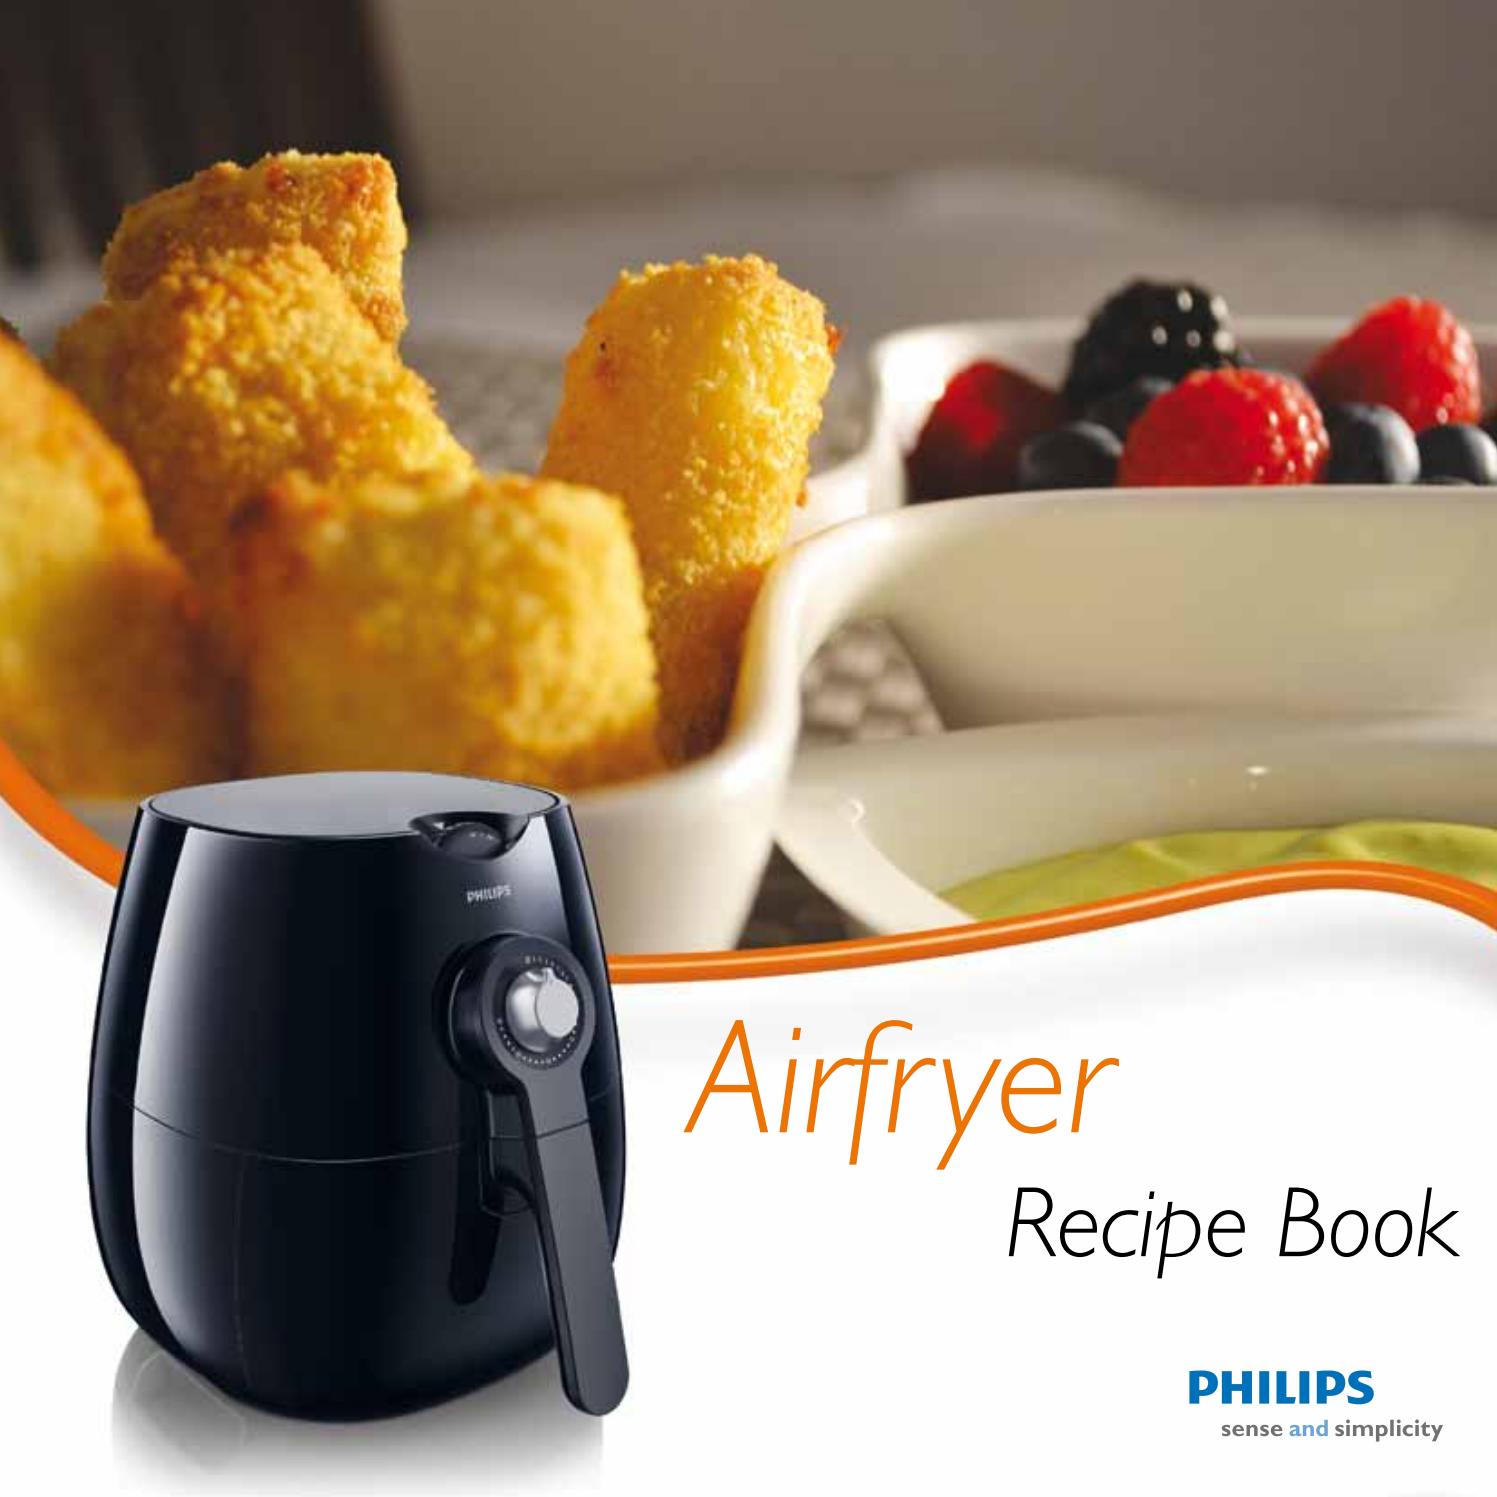 Philips airfryer recipe book by Hyacintha